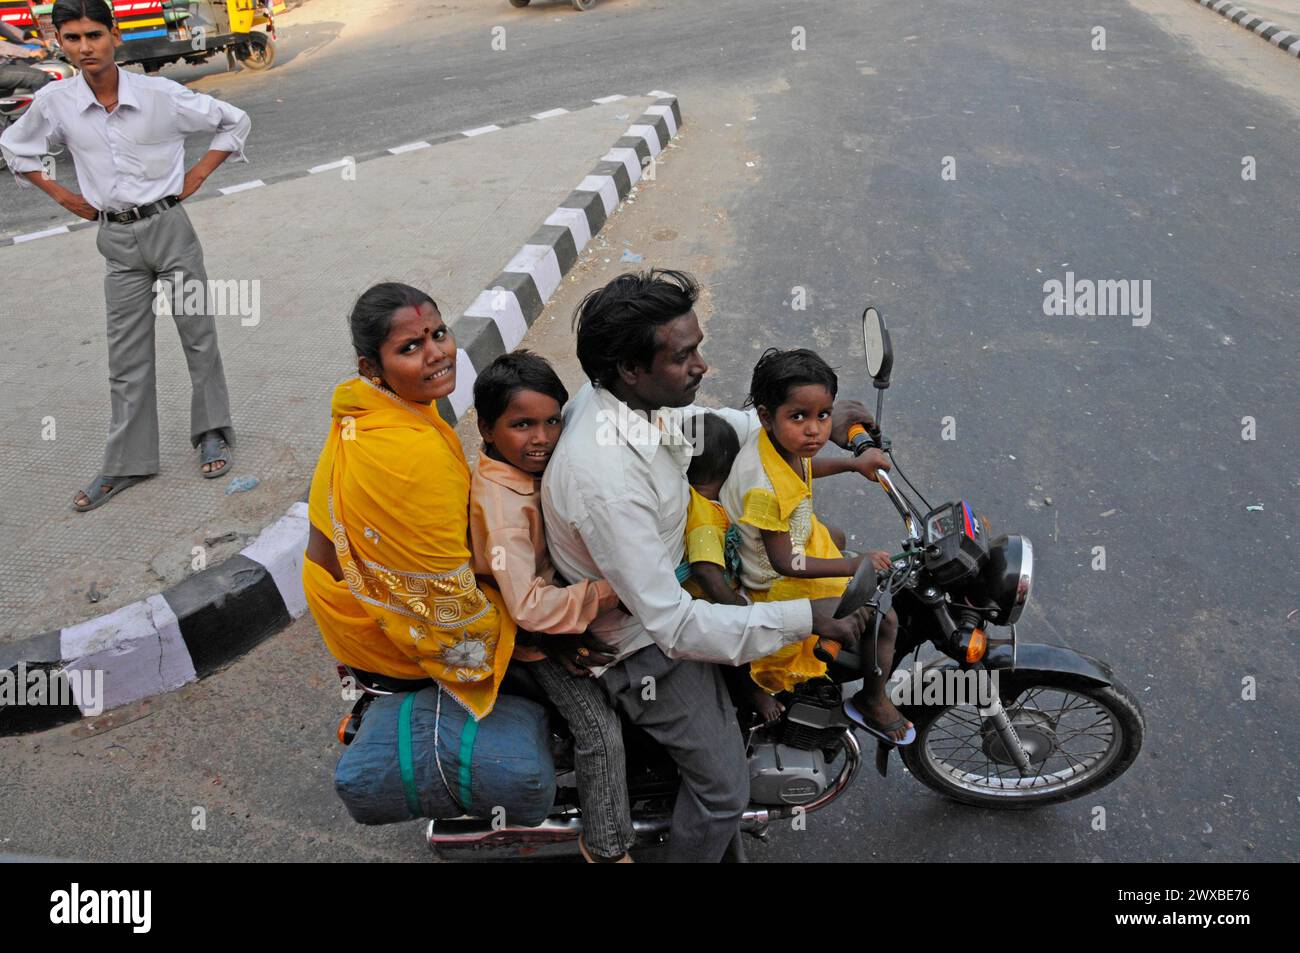 An Indian family rides together on a motorbike through an urban environment, Rajasthan, India Stock Photo